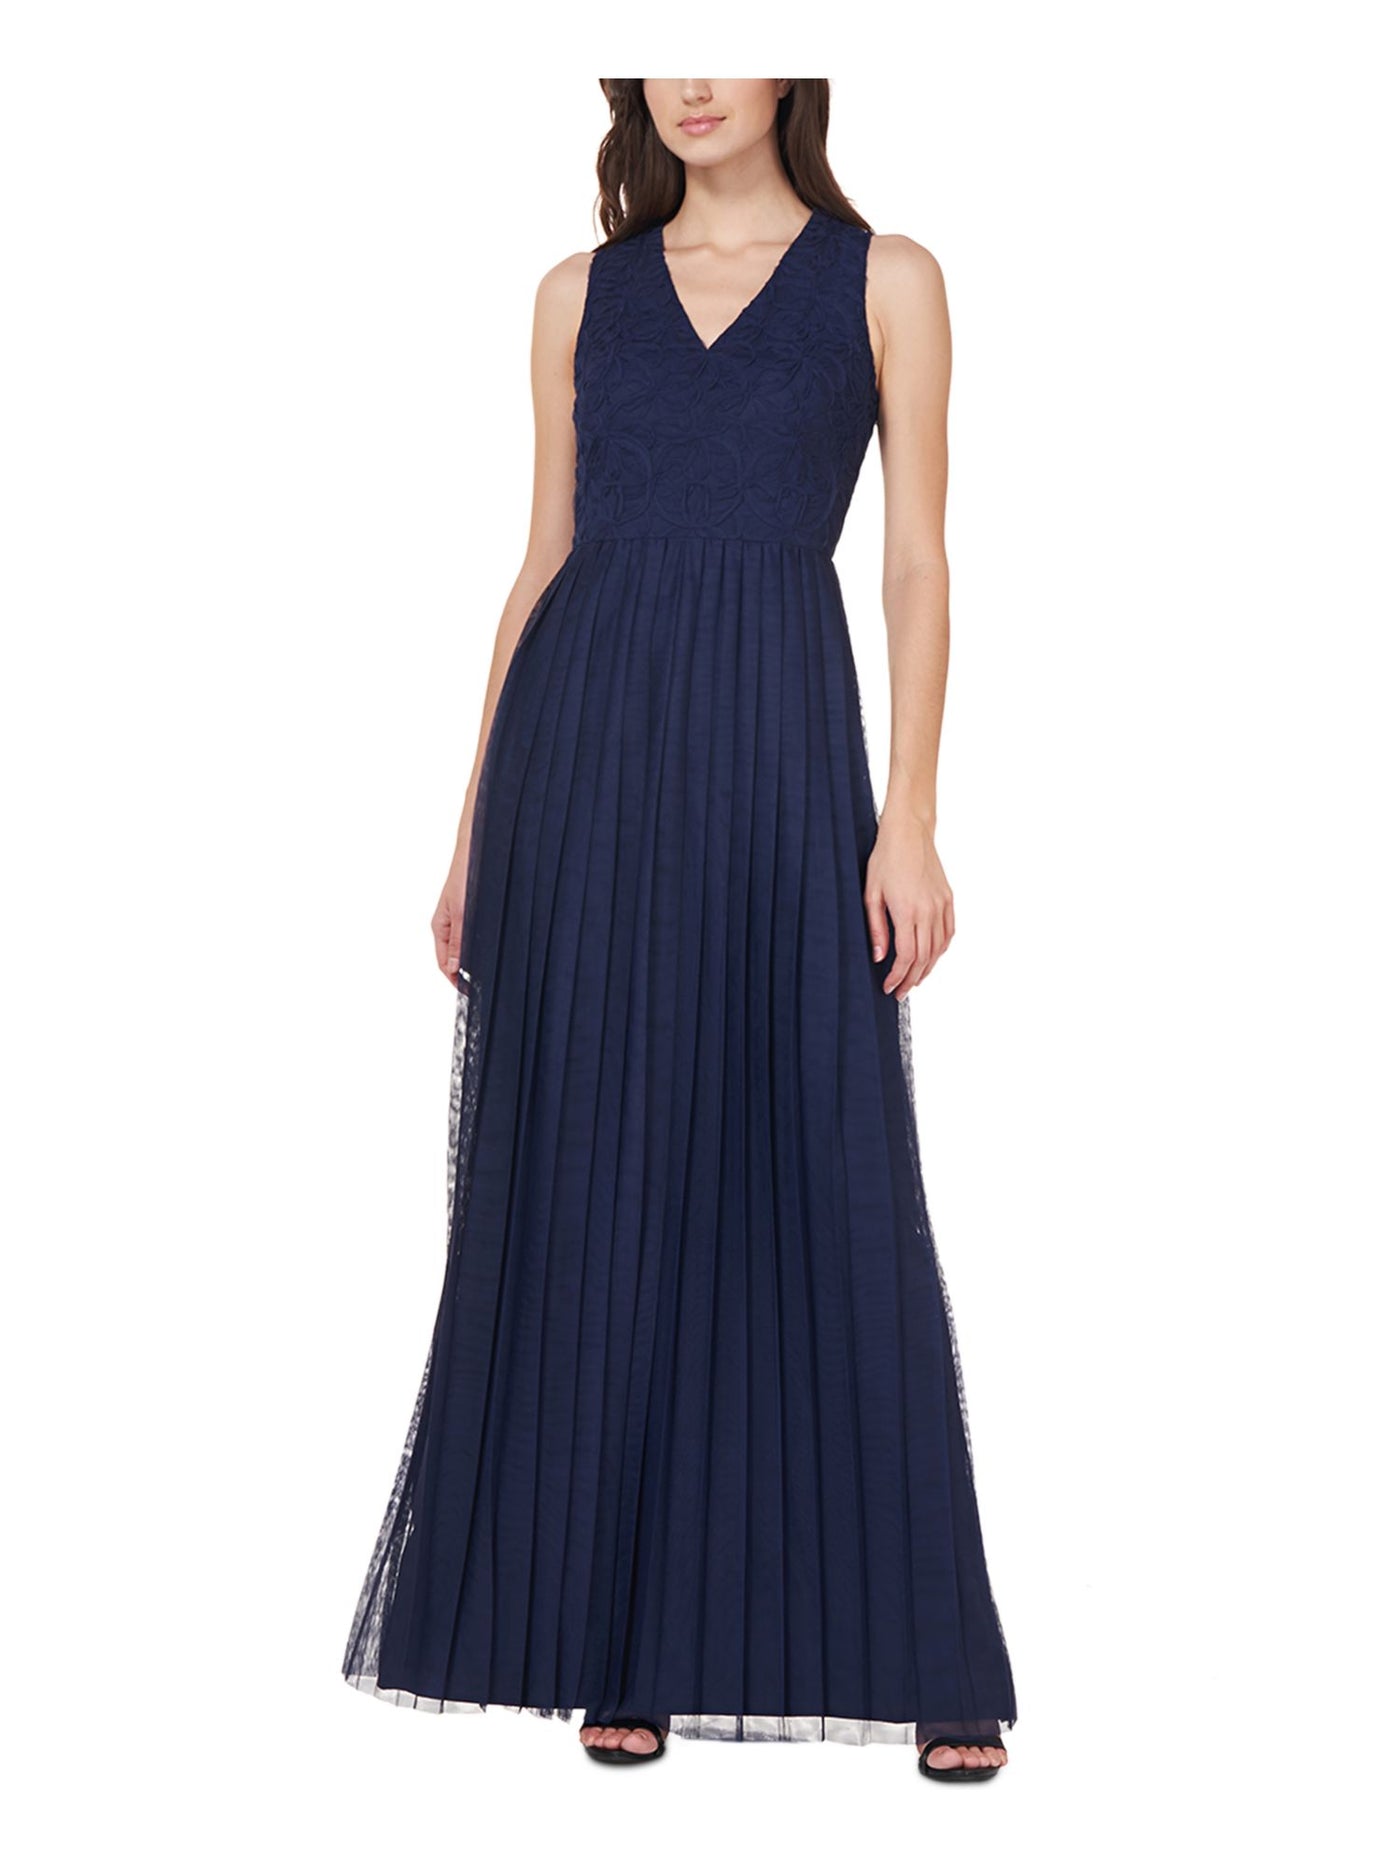 JS COLLECTION Womens Navy Zippered Pleated Sheer Lined Embellished Sleeveless V Neck Full-Length Formal Gown Dress 2